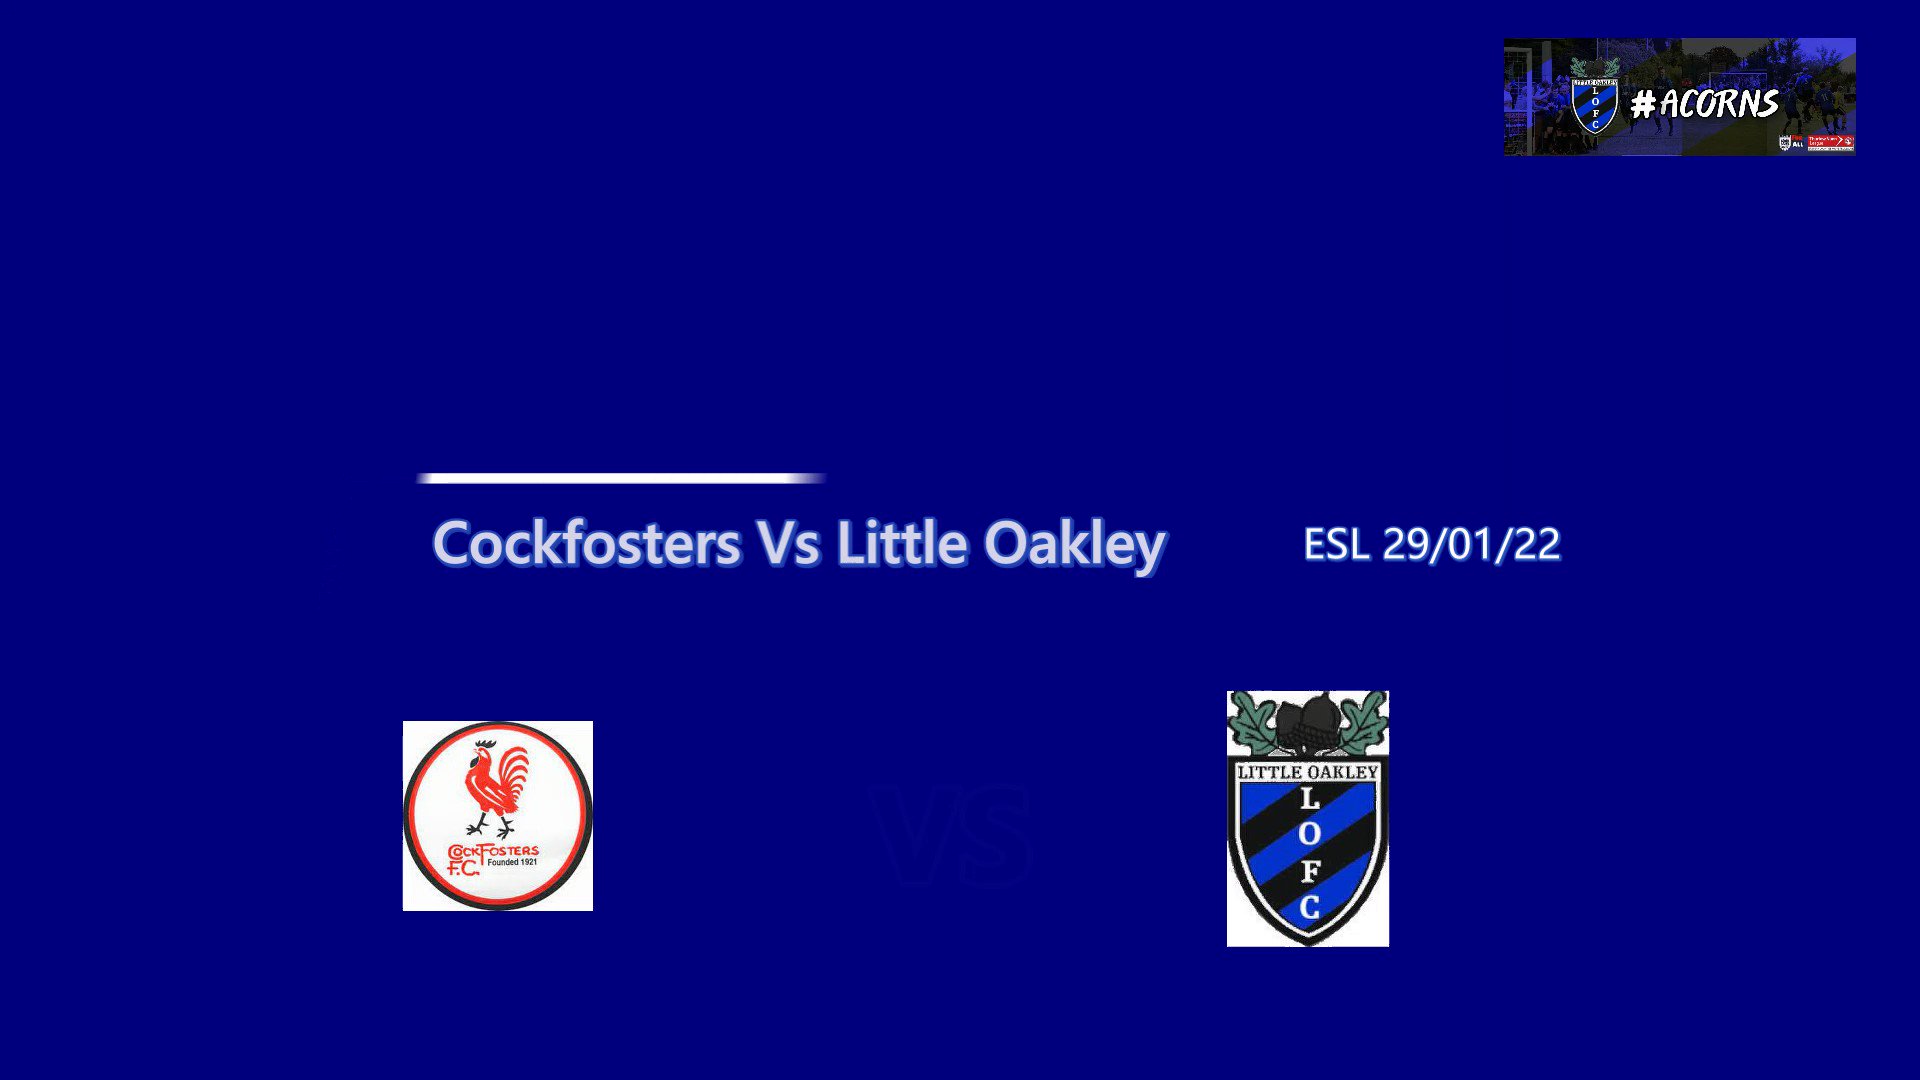 Little Oakley FC on Twitter: "Yesterdays goals from our well deserved 3 points on the road. @HarryMann97 a double and MOM Display. #Acorns https://t.co/aRgTJ3dPHr" / Twitter